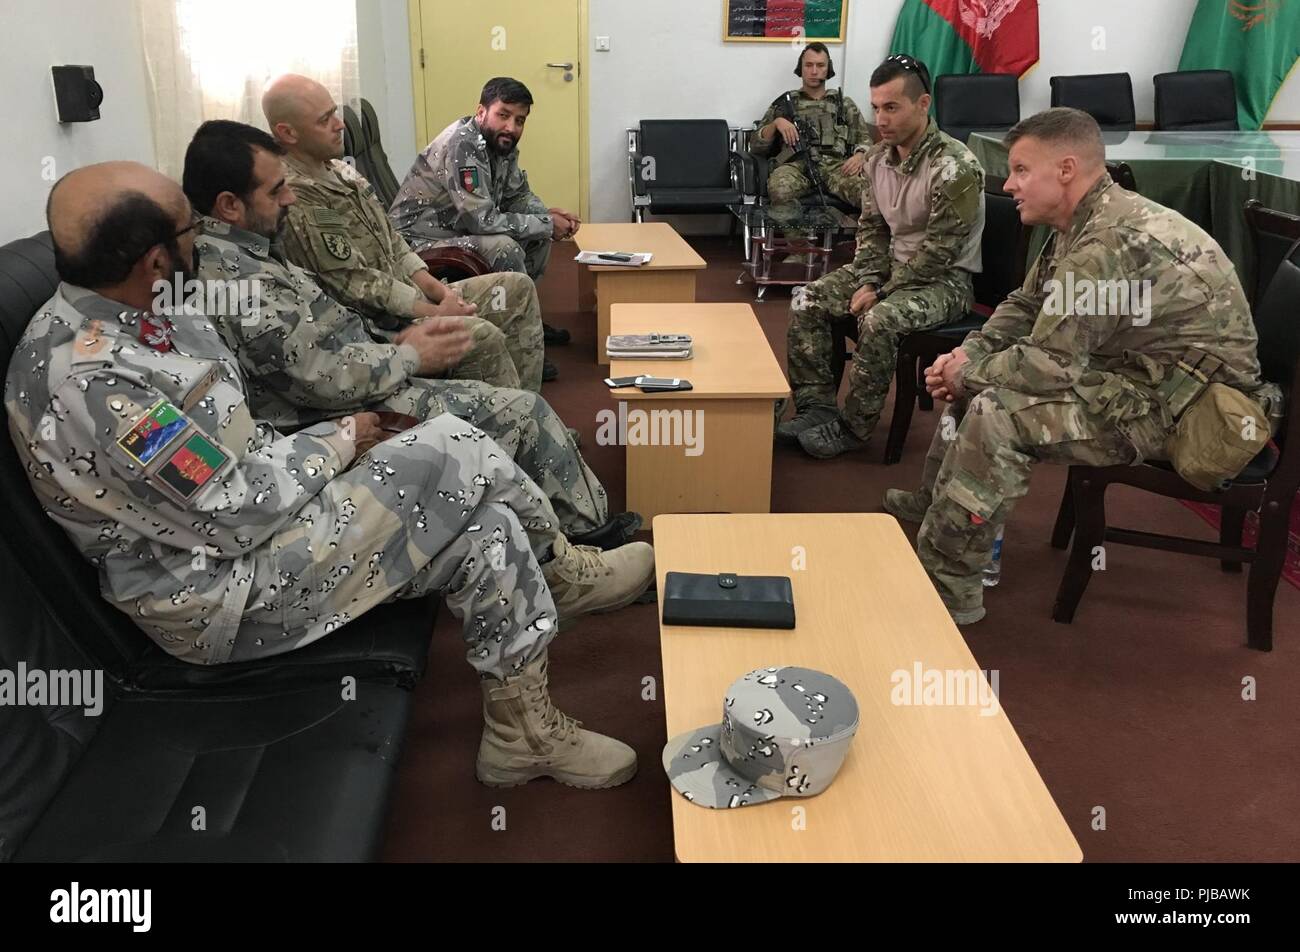 ZABUL PROVINCE, Afghanistan (July 02, 2018) -- Brig. Gen. Mirwais Noorzai, Provincial Chief of Police, Zabul province, along with two of his officers meet with advisors from the NATO-led Resolute Support Security Forces Assistance Brigade at the Afghan 205th Corps, 2nd Brigade Headquarters. The Afghan National Army is working closely with the Afghan National Police in the Afghan-led offensive operations in the south. (NATO Stock Photo